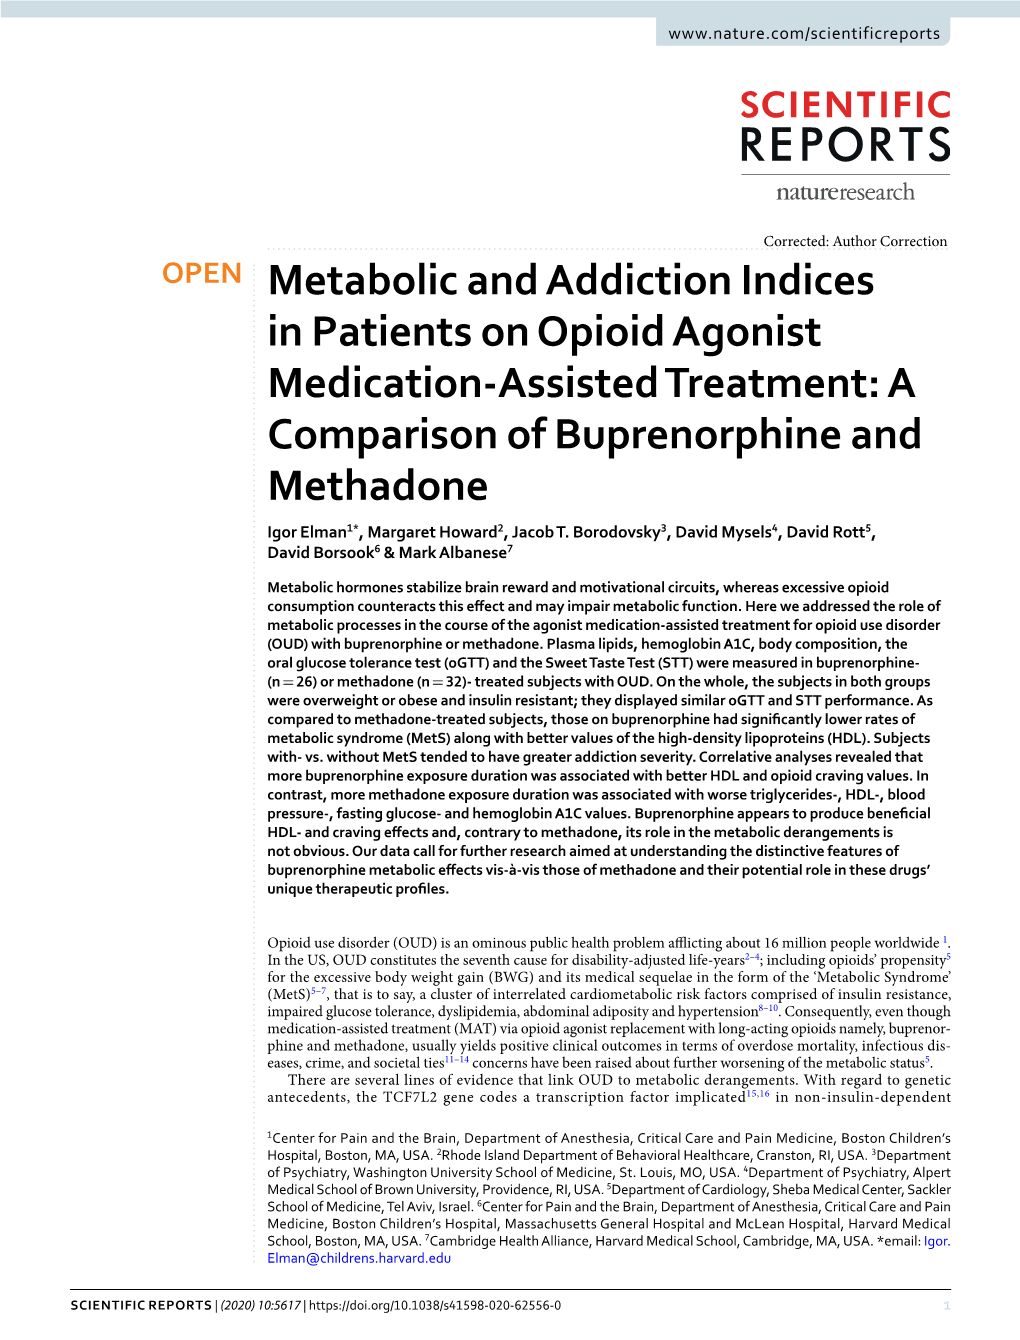 Metabolic and Addiction Indices in Patients on Opioid Agonist